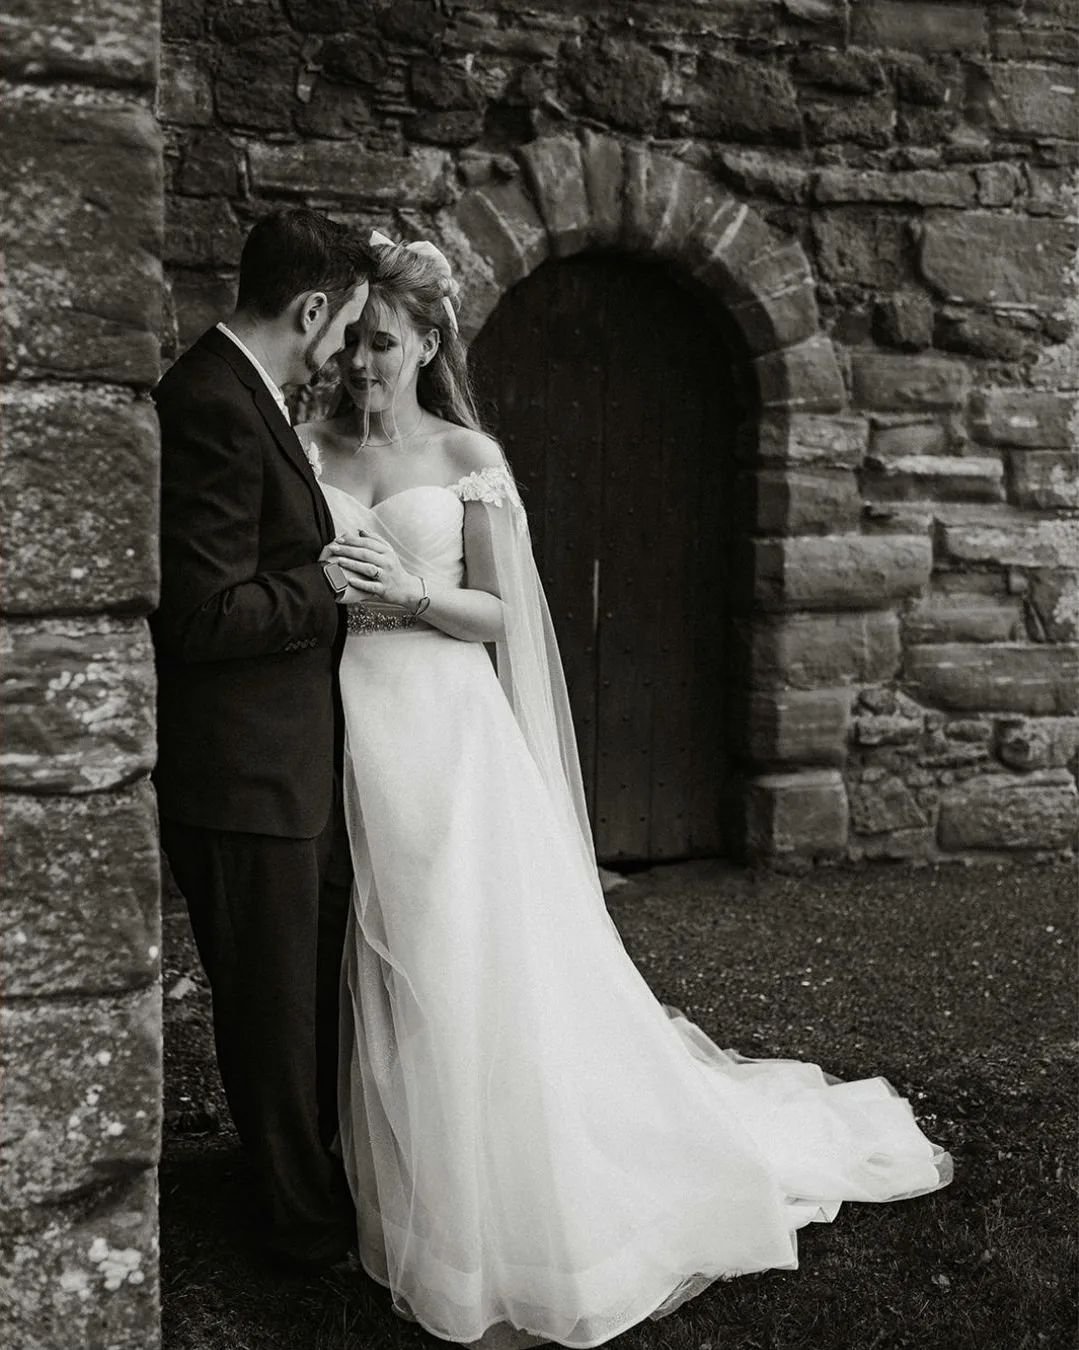 When the vibe is whimsical romance at a Scottish castle 🧡🌙

When Dan and Ruth planned a wonderfully whimsical wedding in a marquee on a Scottish farm, a big part of their vision was heading to the local castle ruins in the land rovers for beautiful